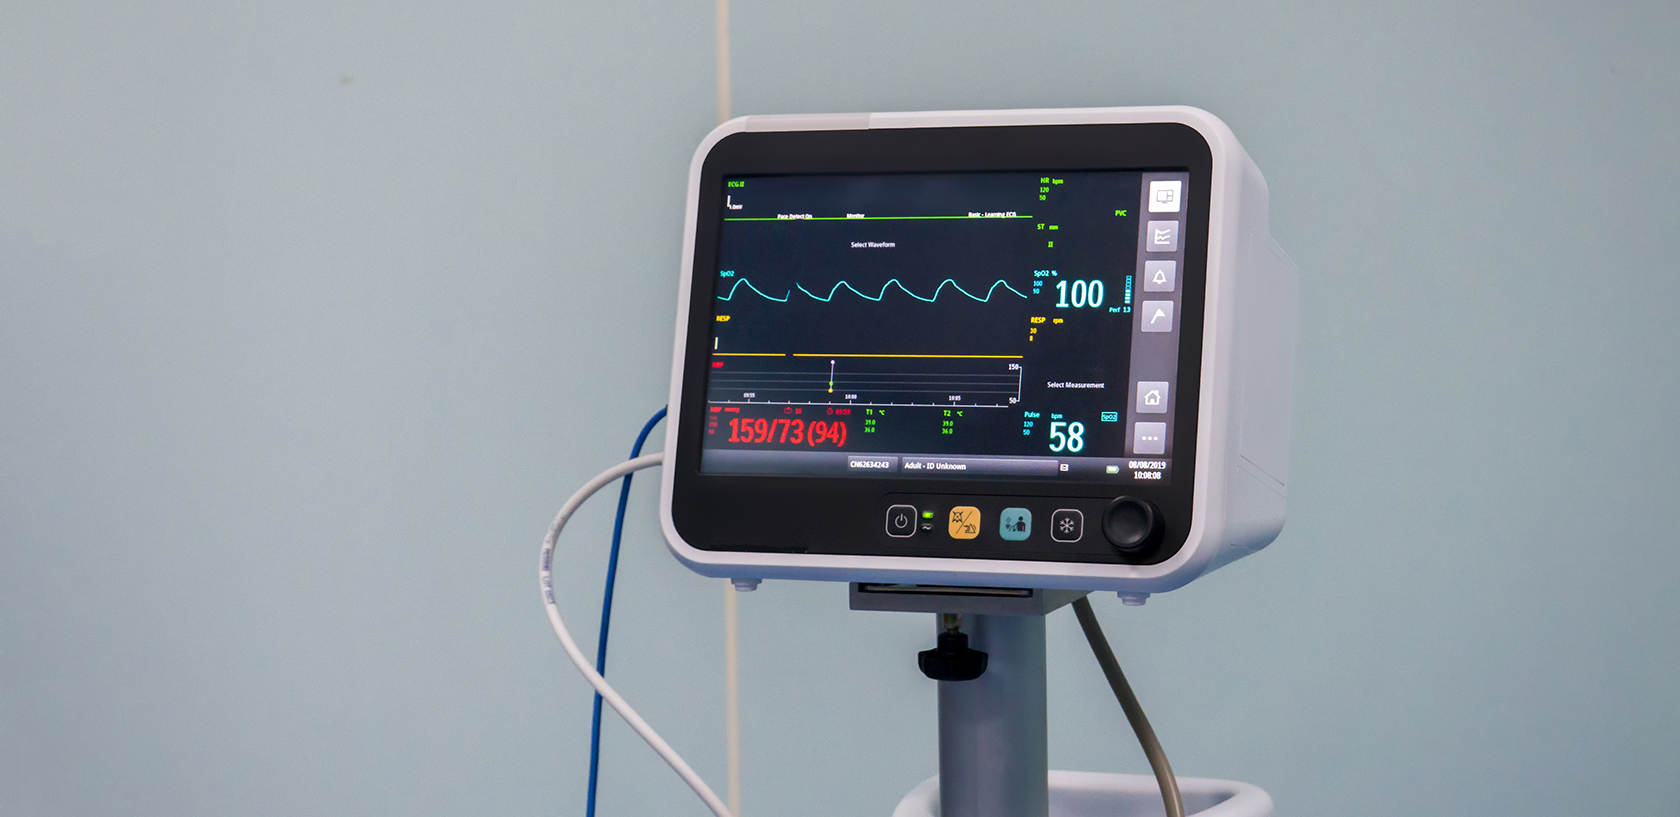 Electrocardiogram in hospital surgery operating emergency room showing patient heart rate